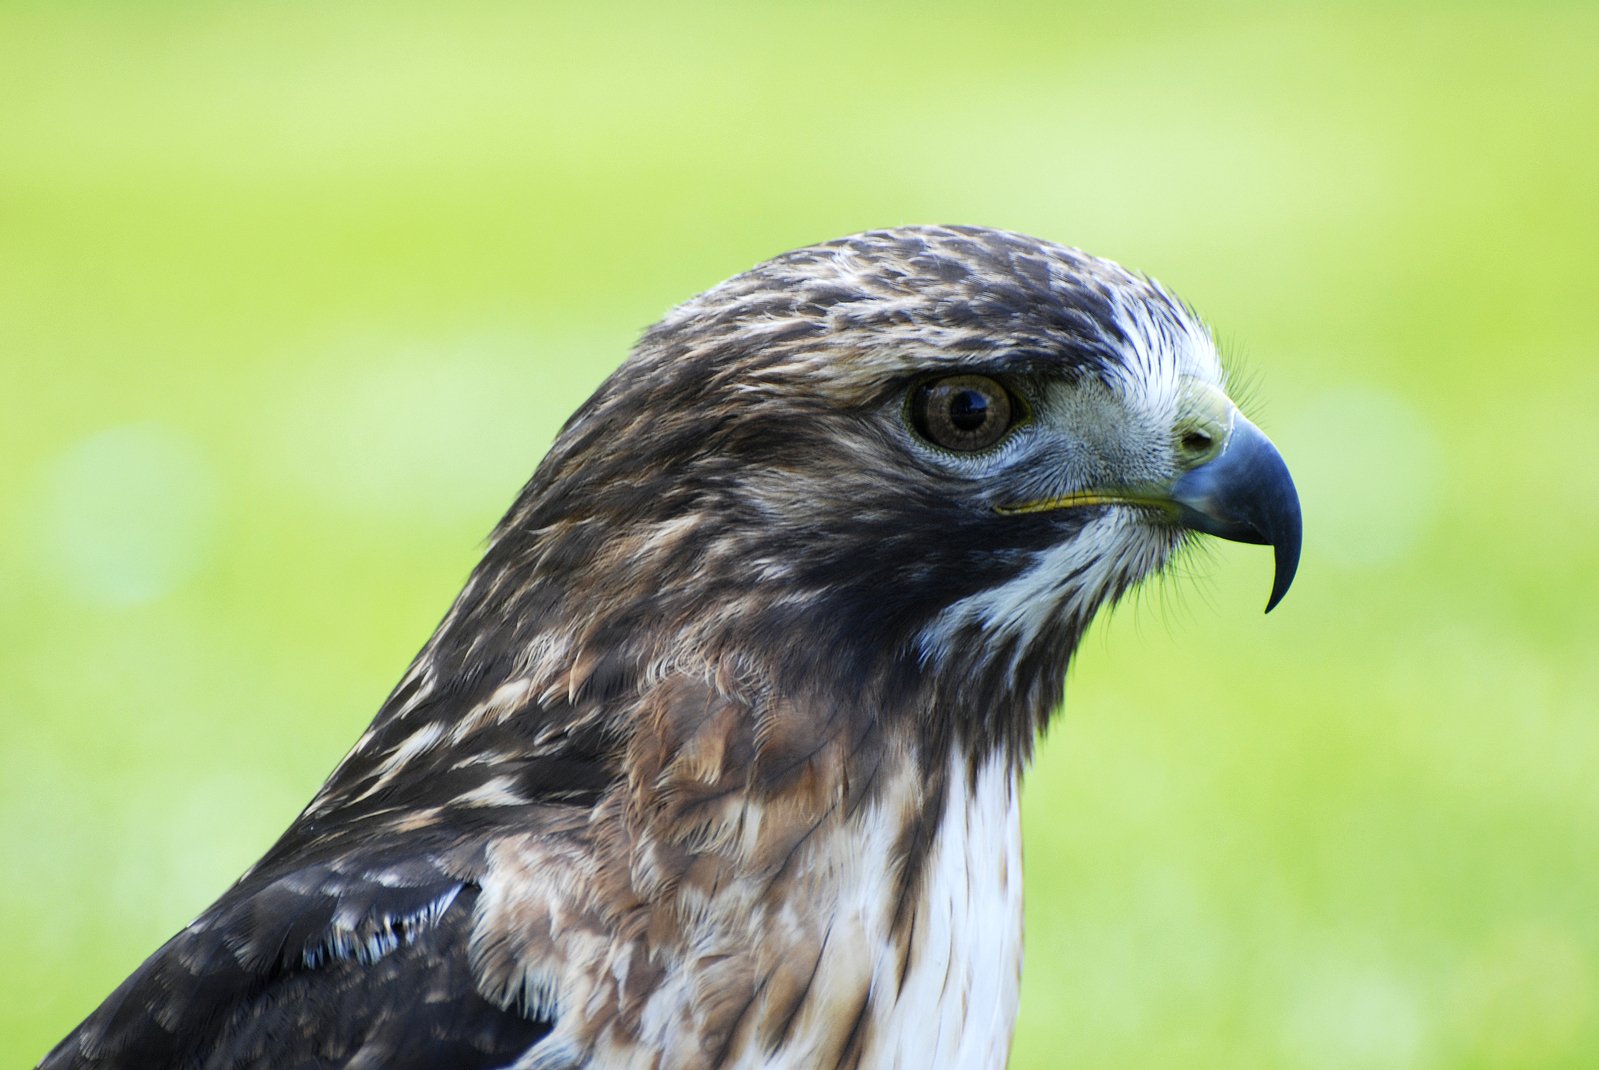 an eagle is standing in a field of green grass